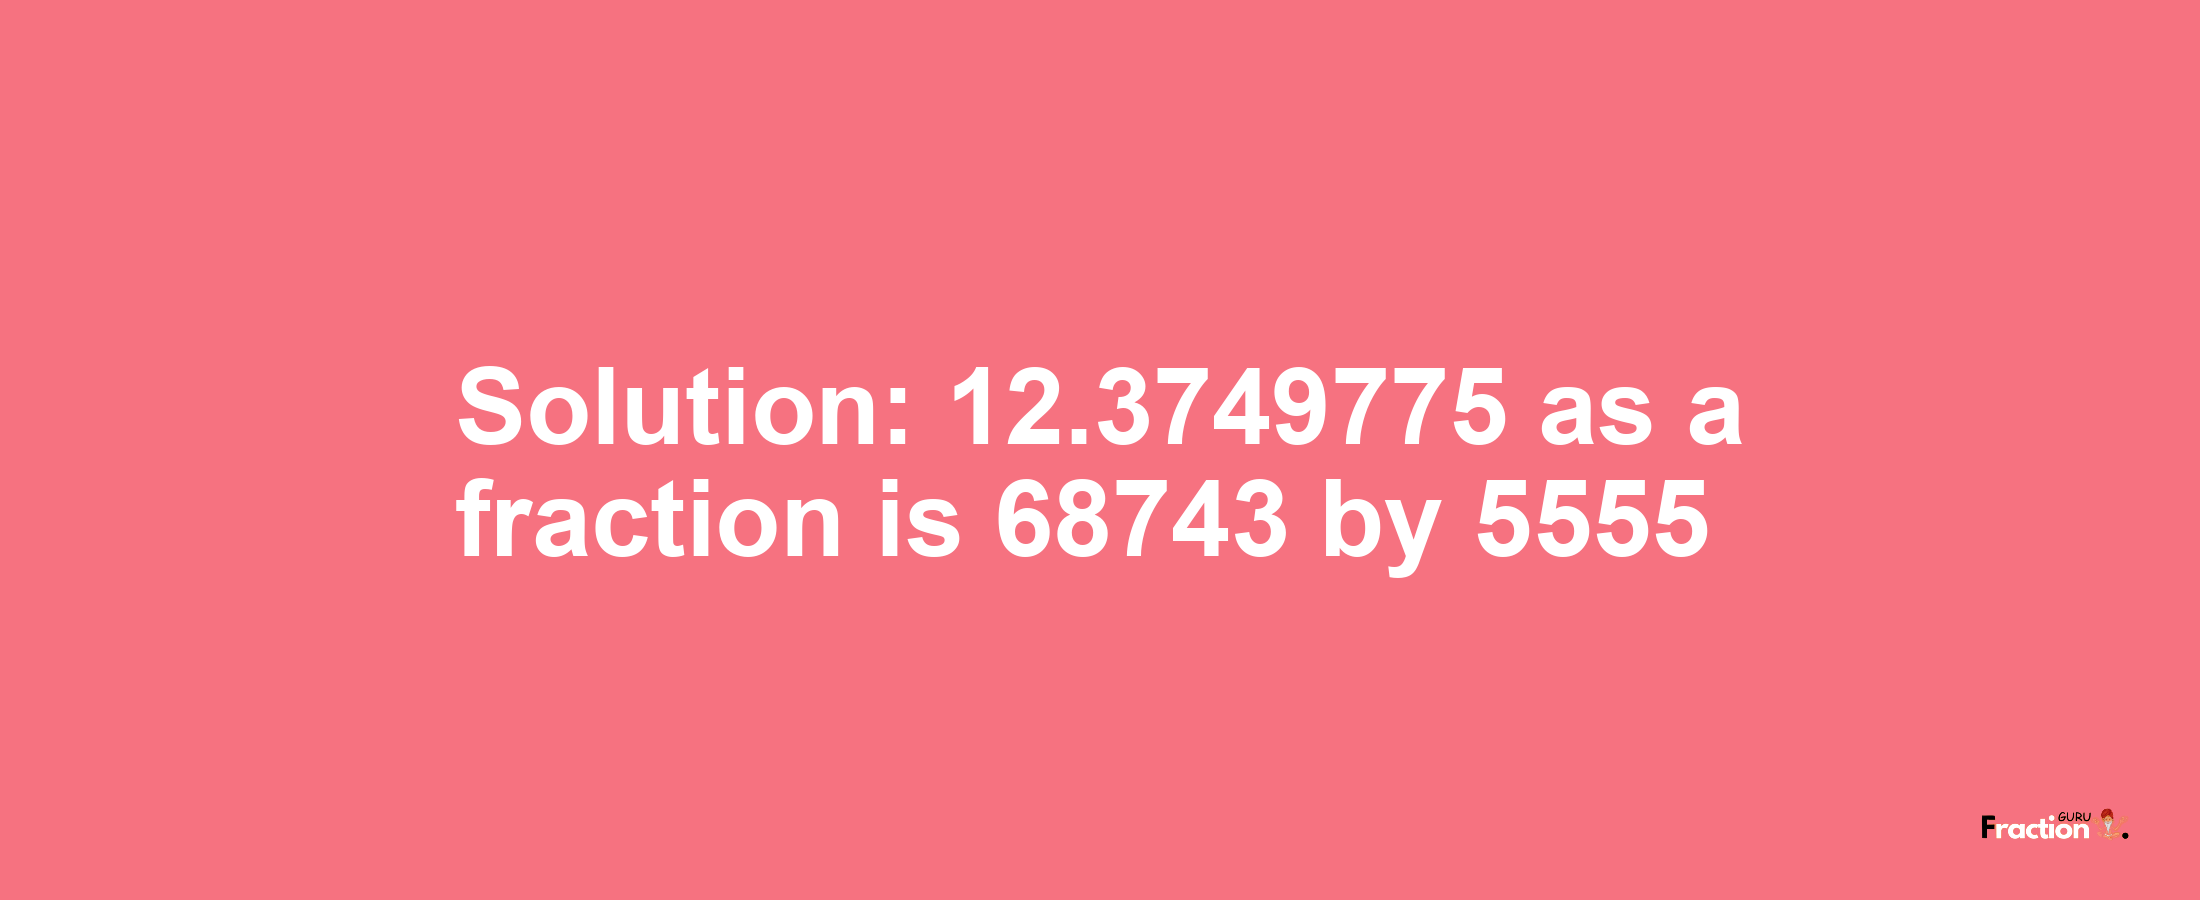 Solution:12.3749775 as a fraction is 68743/5555